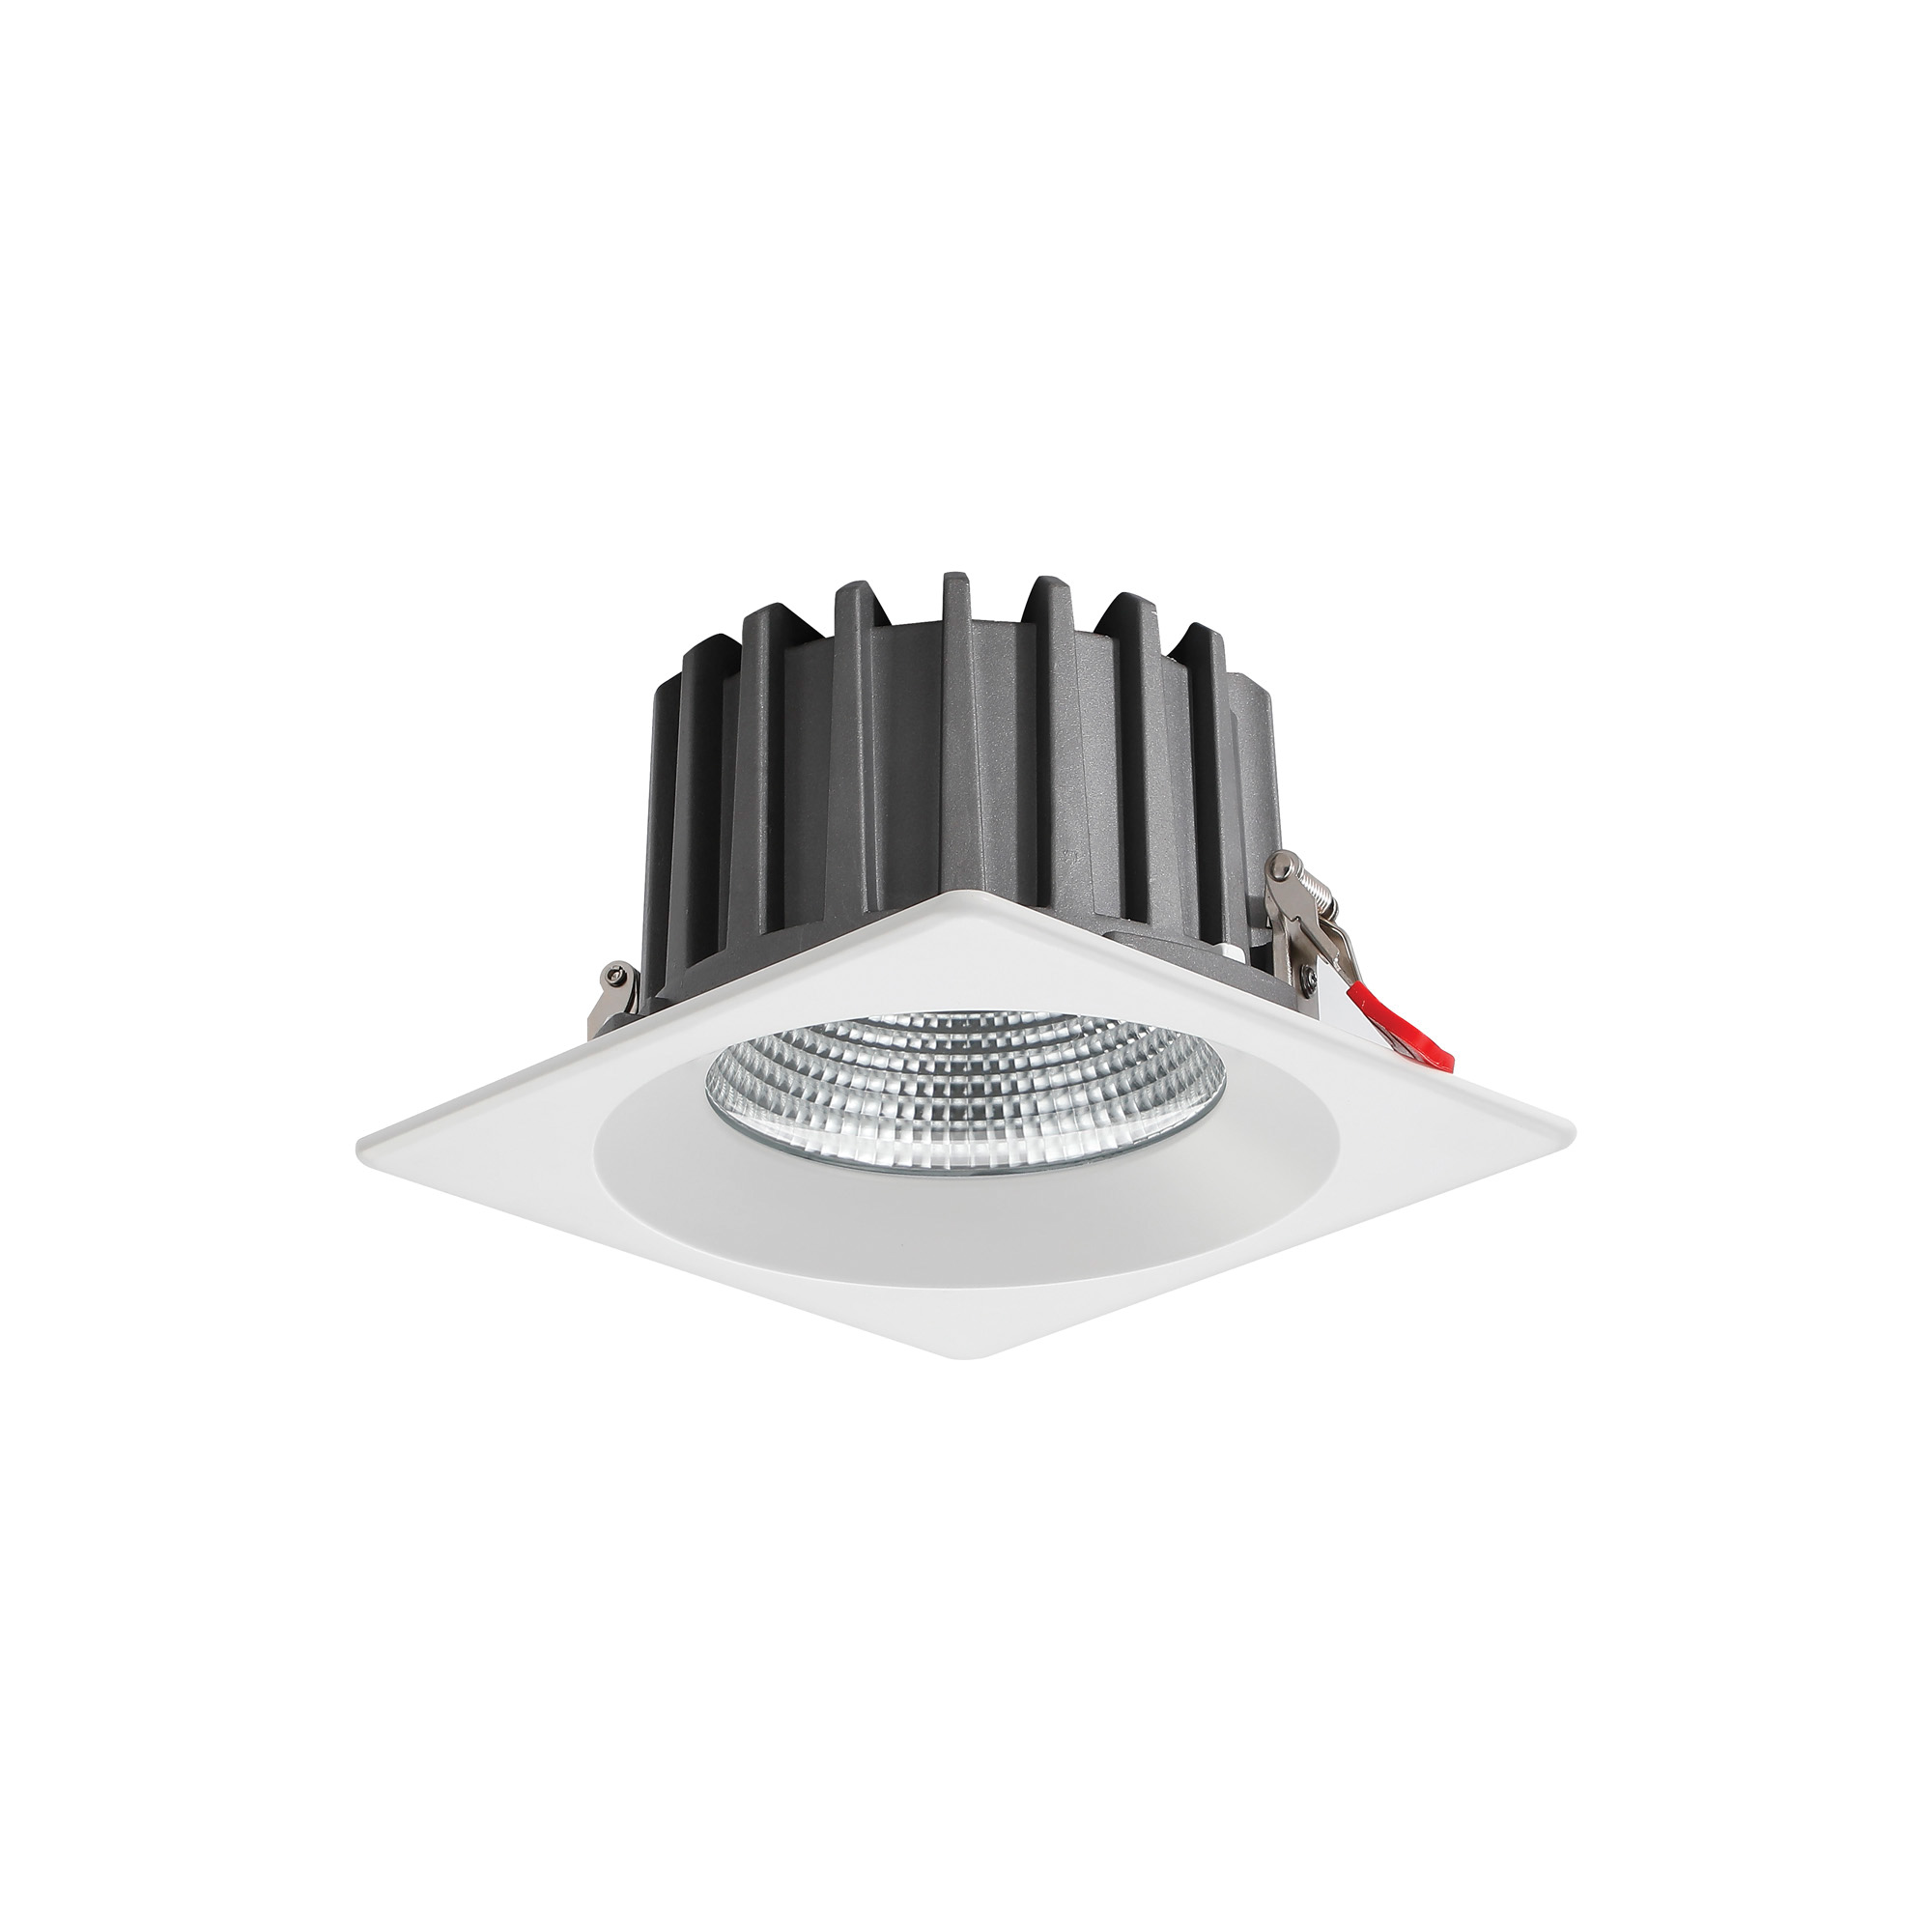 DL200073  Bionic 24, 24W, 700mA, White Deep Square Recessed Downlight, 1920lm ,Cut Out 155mm, 42° , 3000K, IP44, DRIVER INC., 5yrs Warranty.